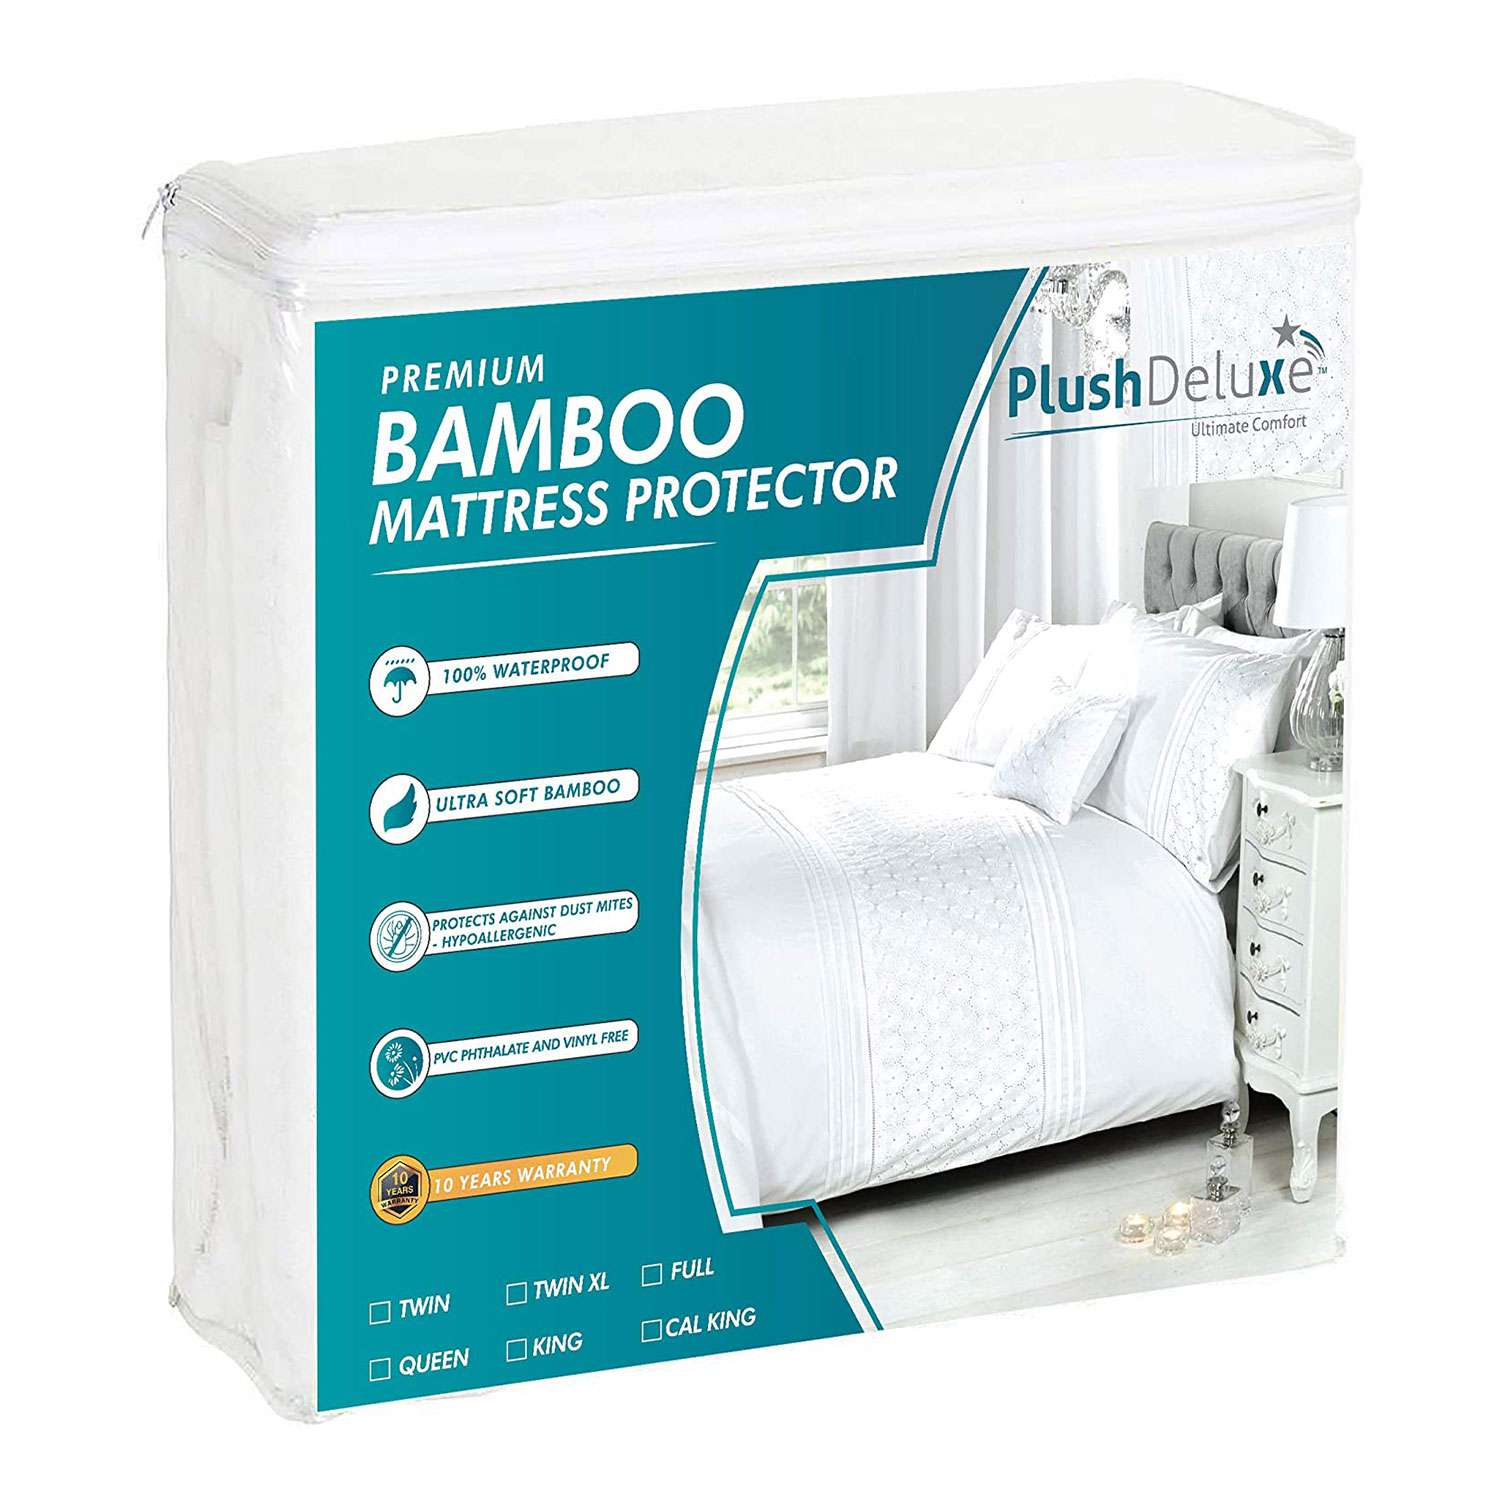 KING SIZE FITTED Waterproof Quilted Mattress Protector Cover Bed Wet Sheet 